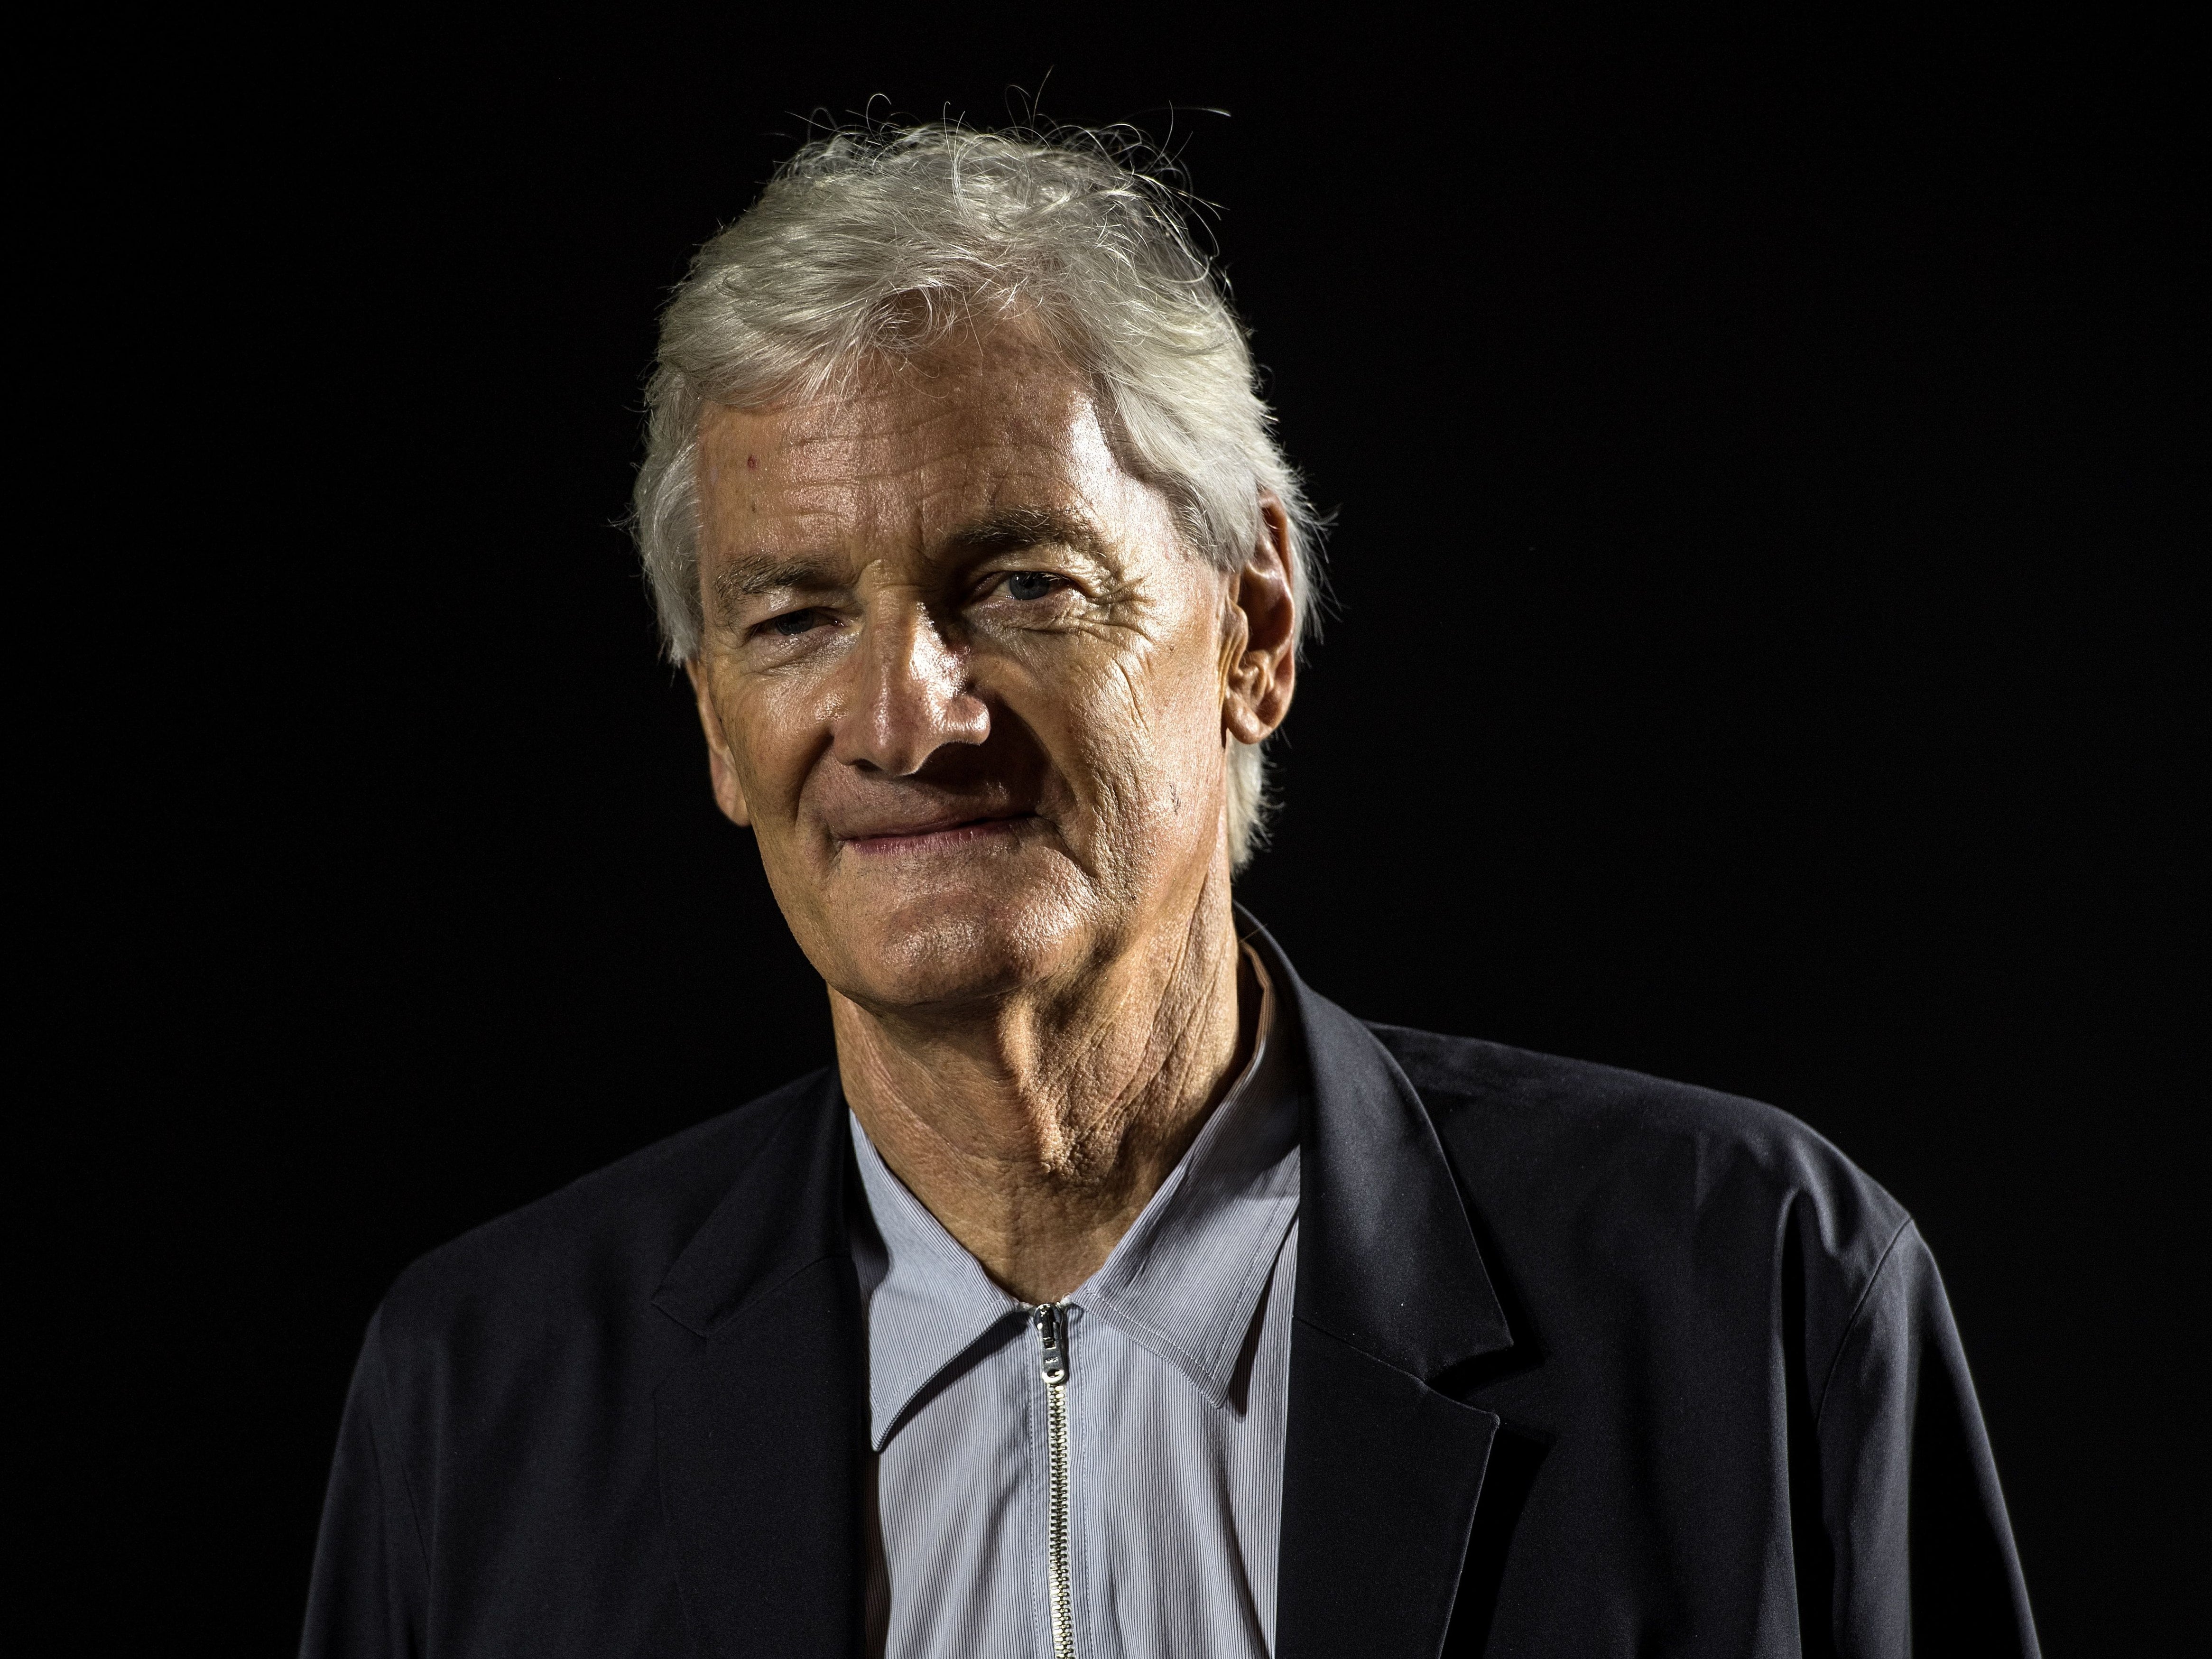 Sir James Dyson was second on the 2022 annual list of Britain’s wealthiest